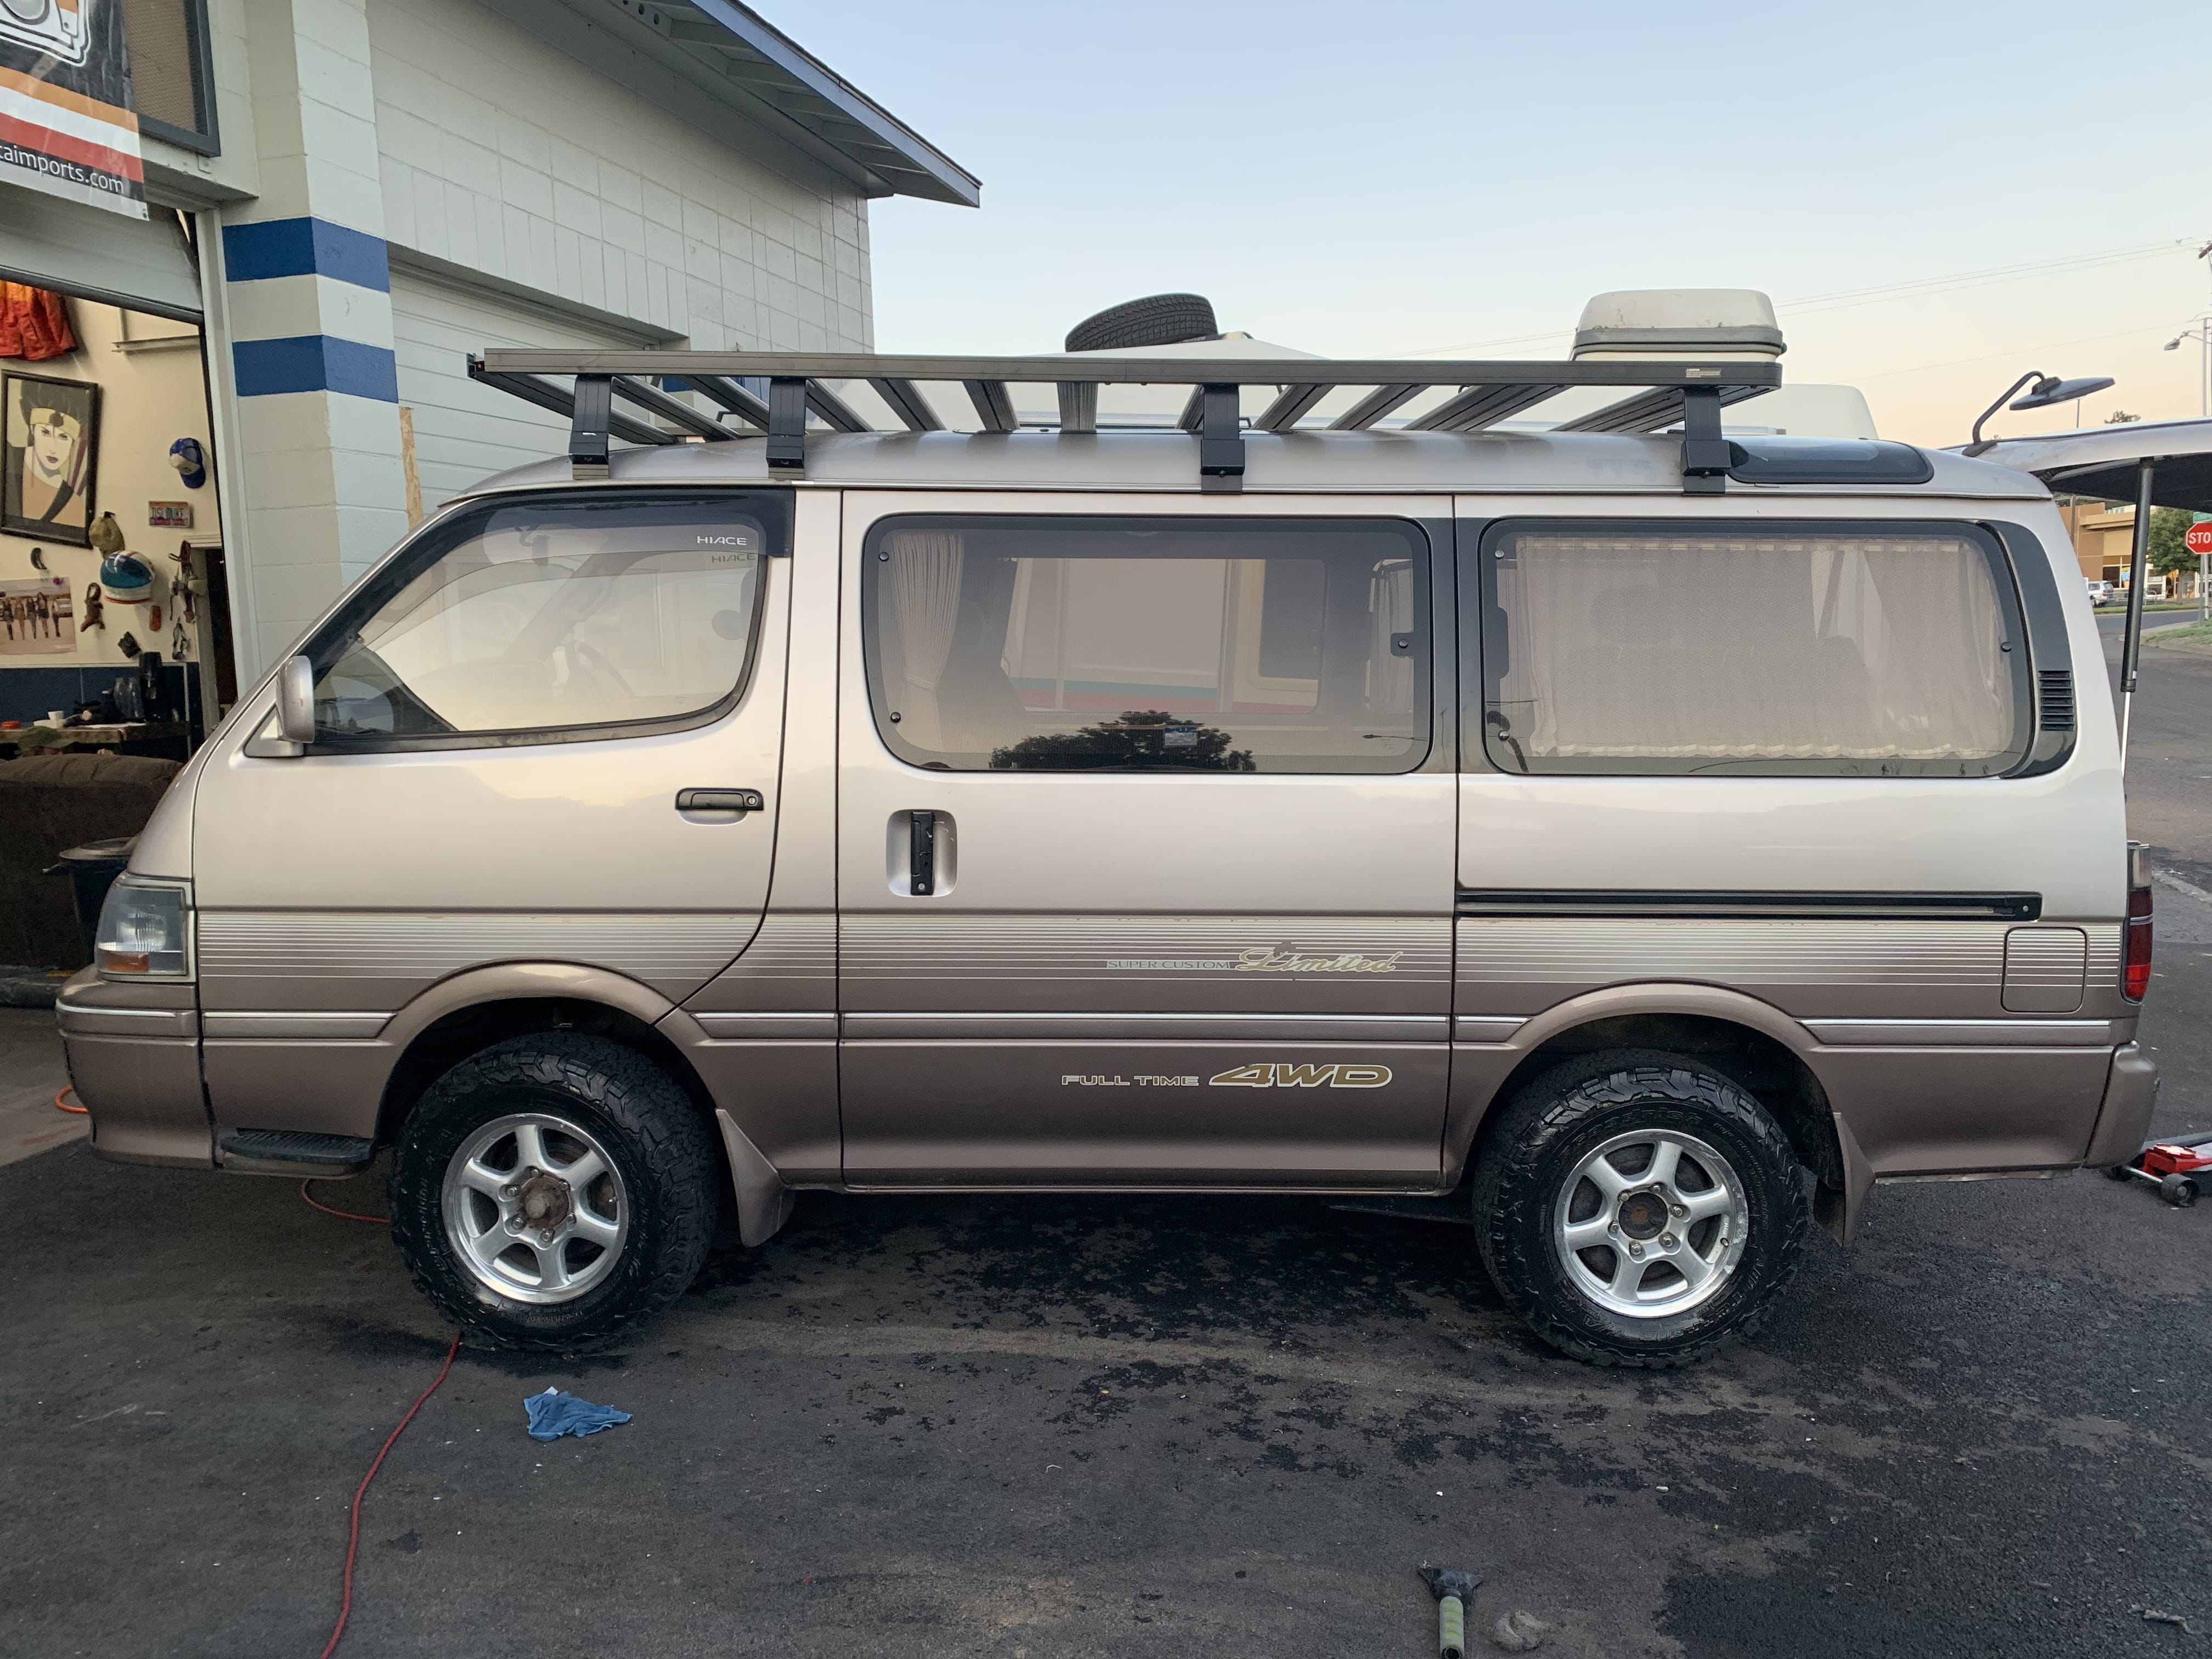 LOW MILE 1994 HIACE KZH106 w/ tons of FACTORY GOODIES